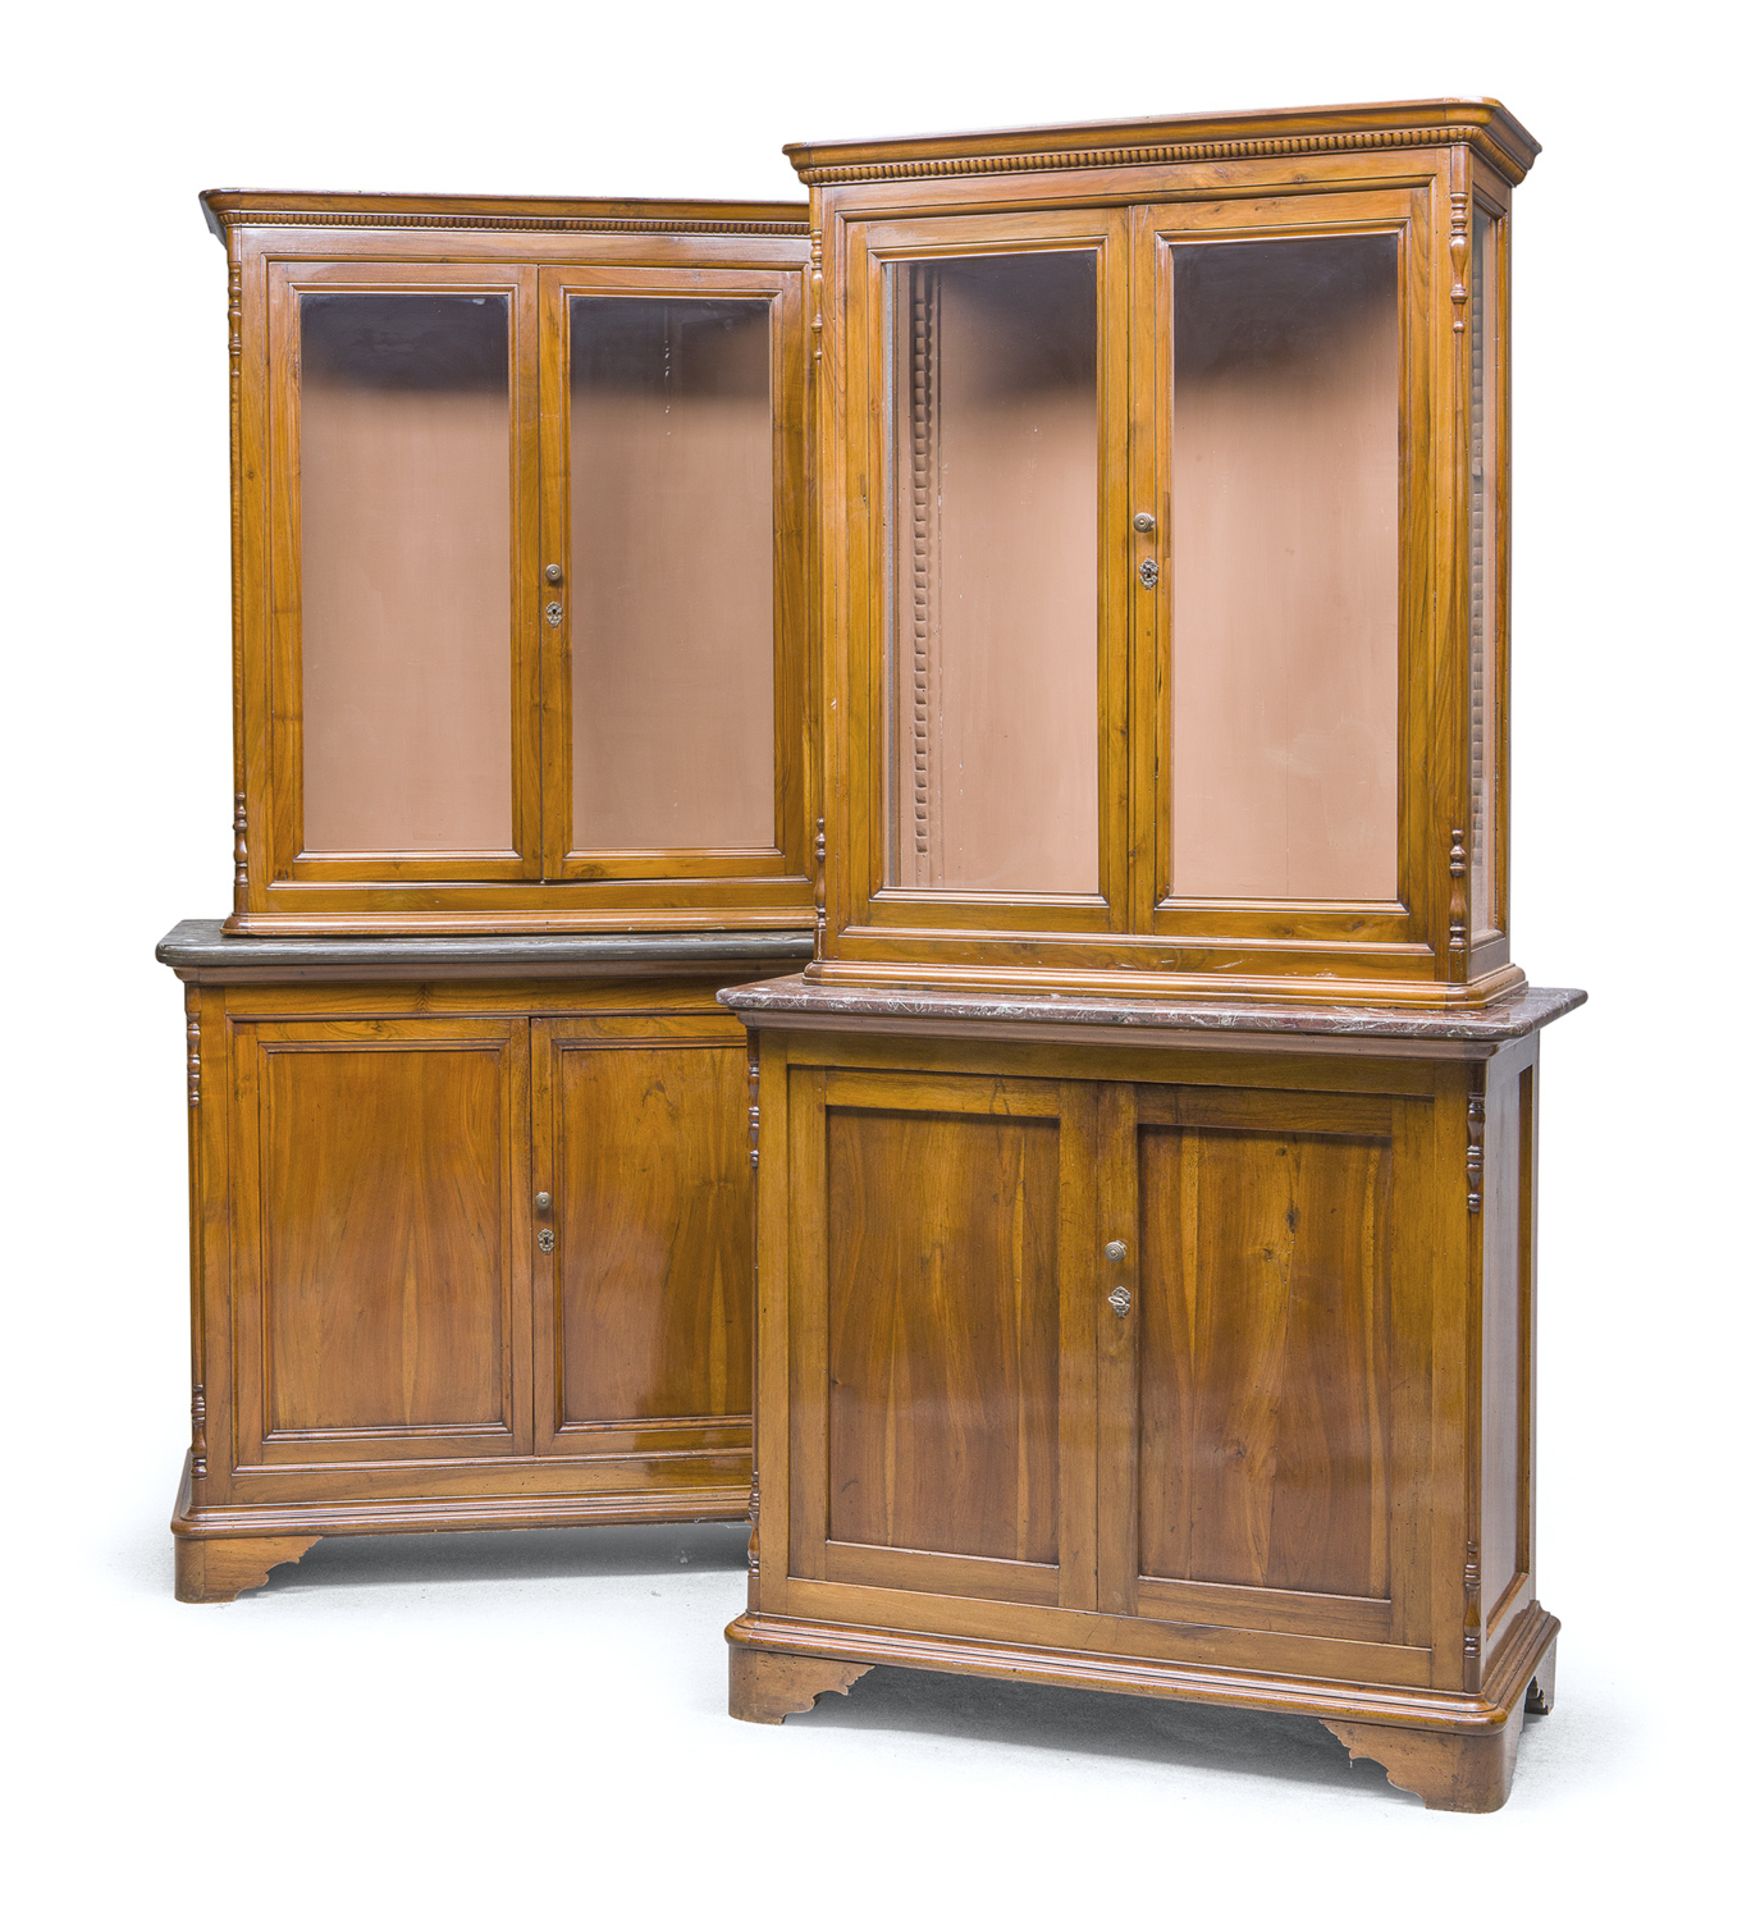 PAIR OF WALNUT BOOKCASES CENTRAL ITALY